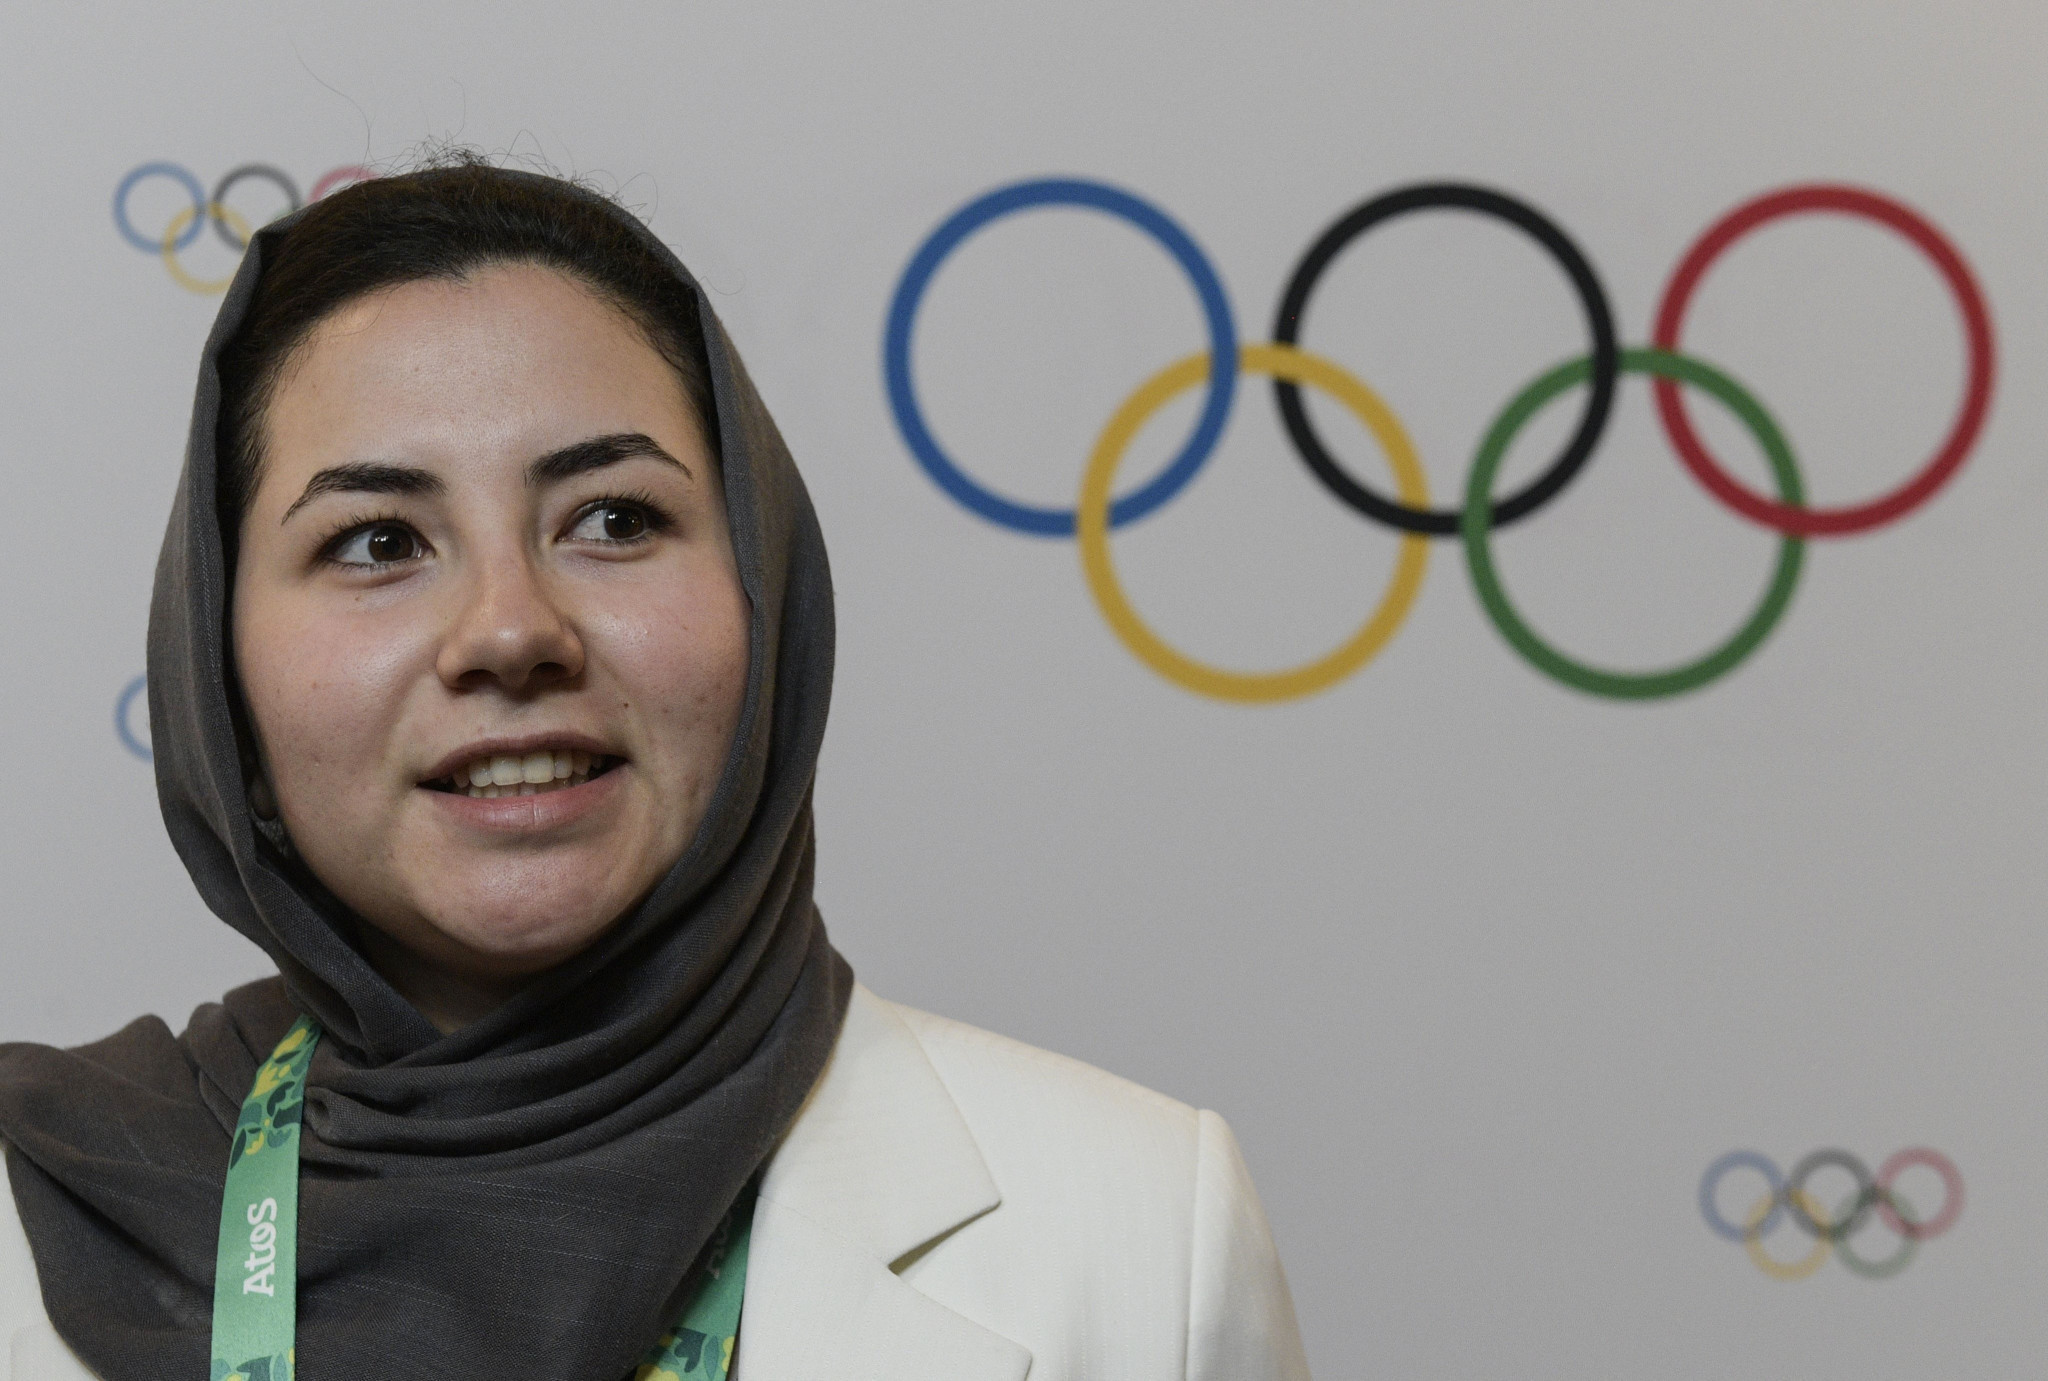 Afghan IOC member Samira Asghari was among the delegation who visited the athletes from Ukraine and Afghanistan at the UCI World Cycling Centre ©Getty Images